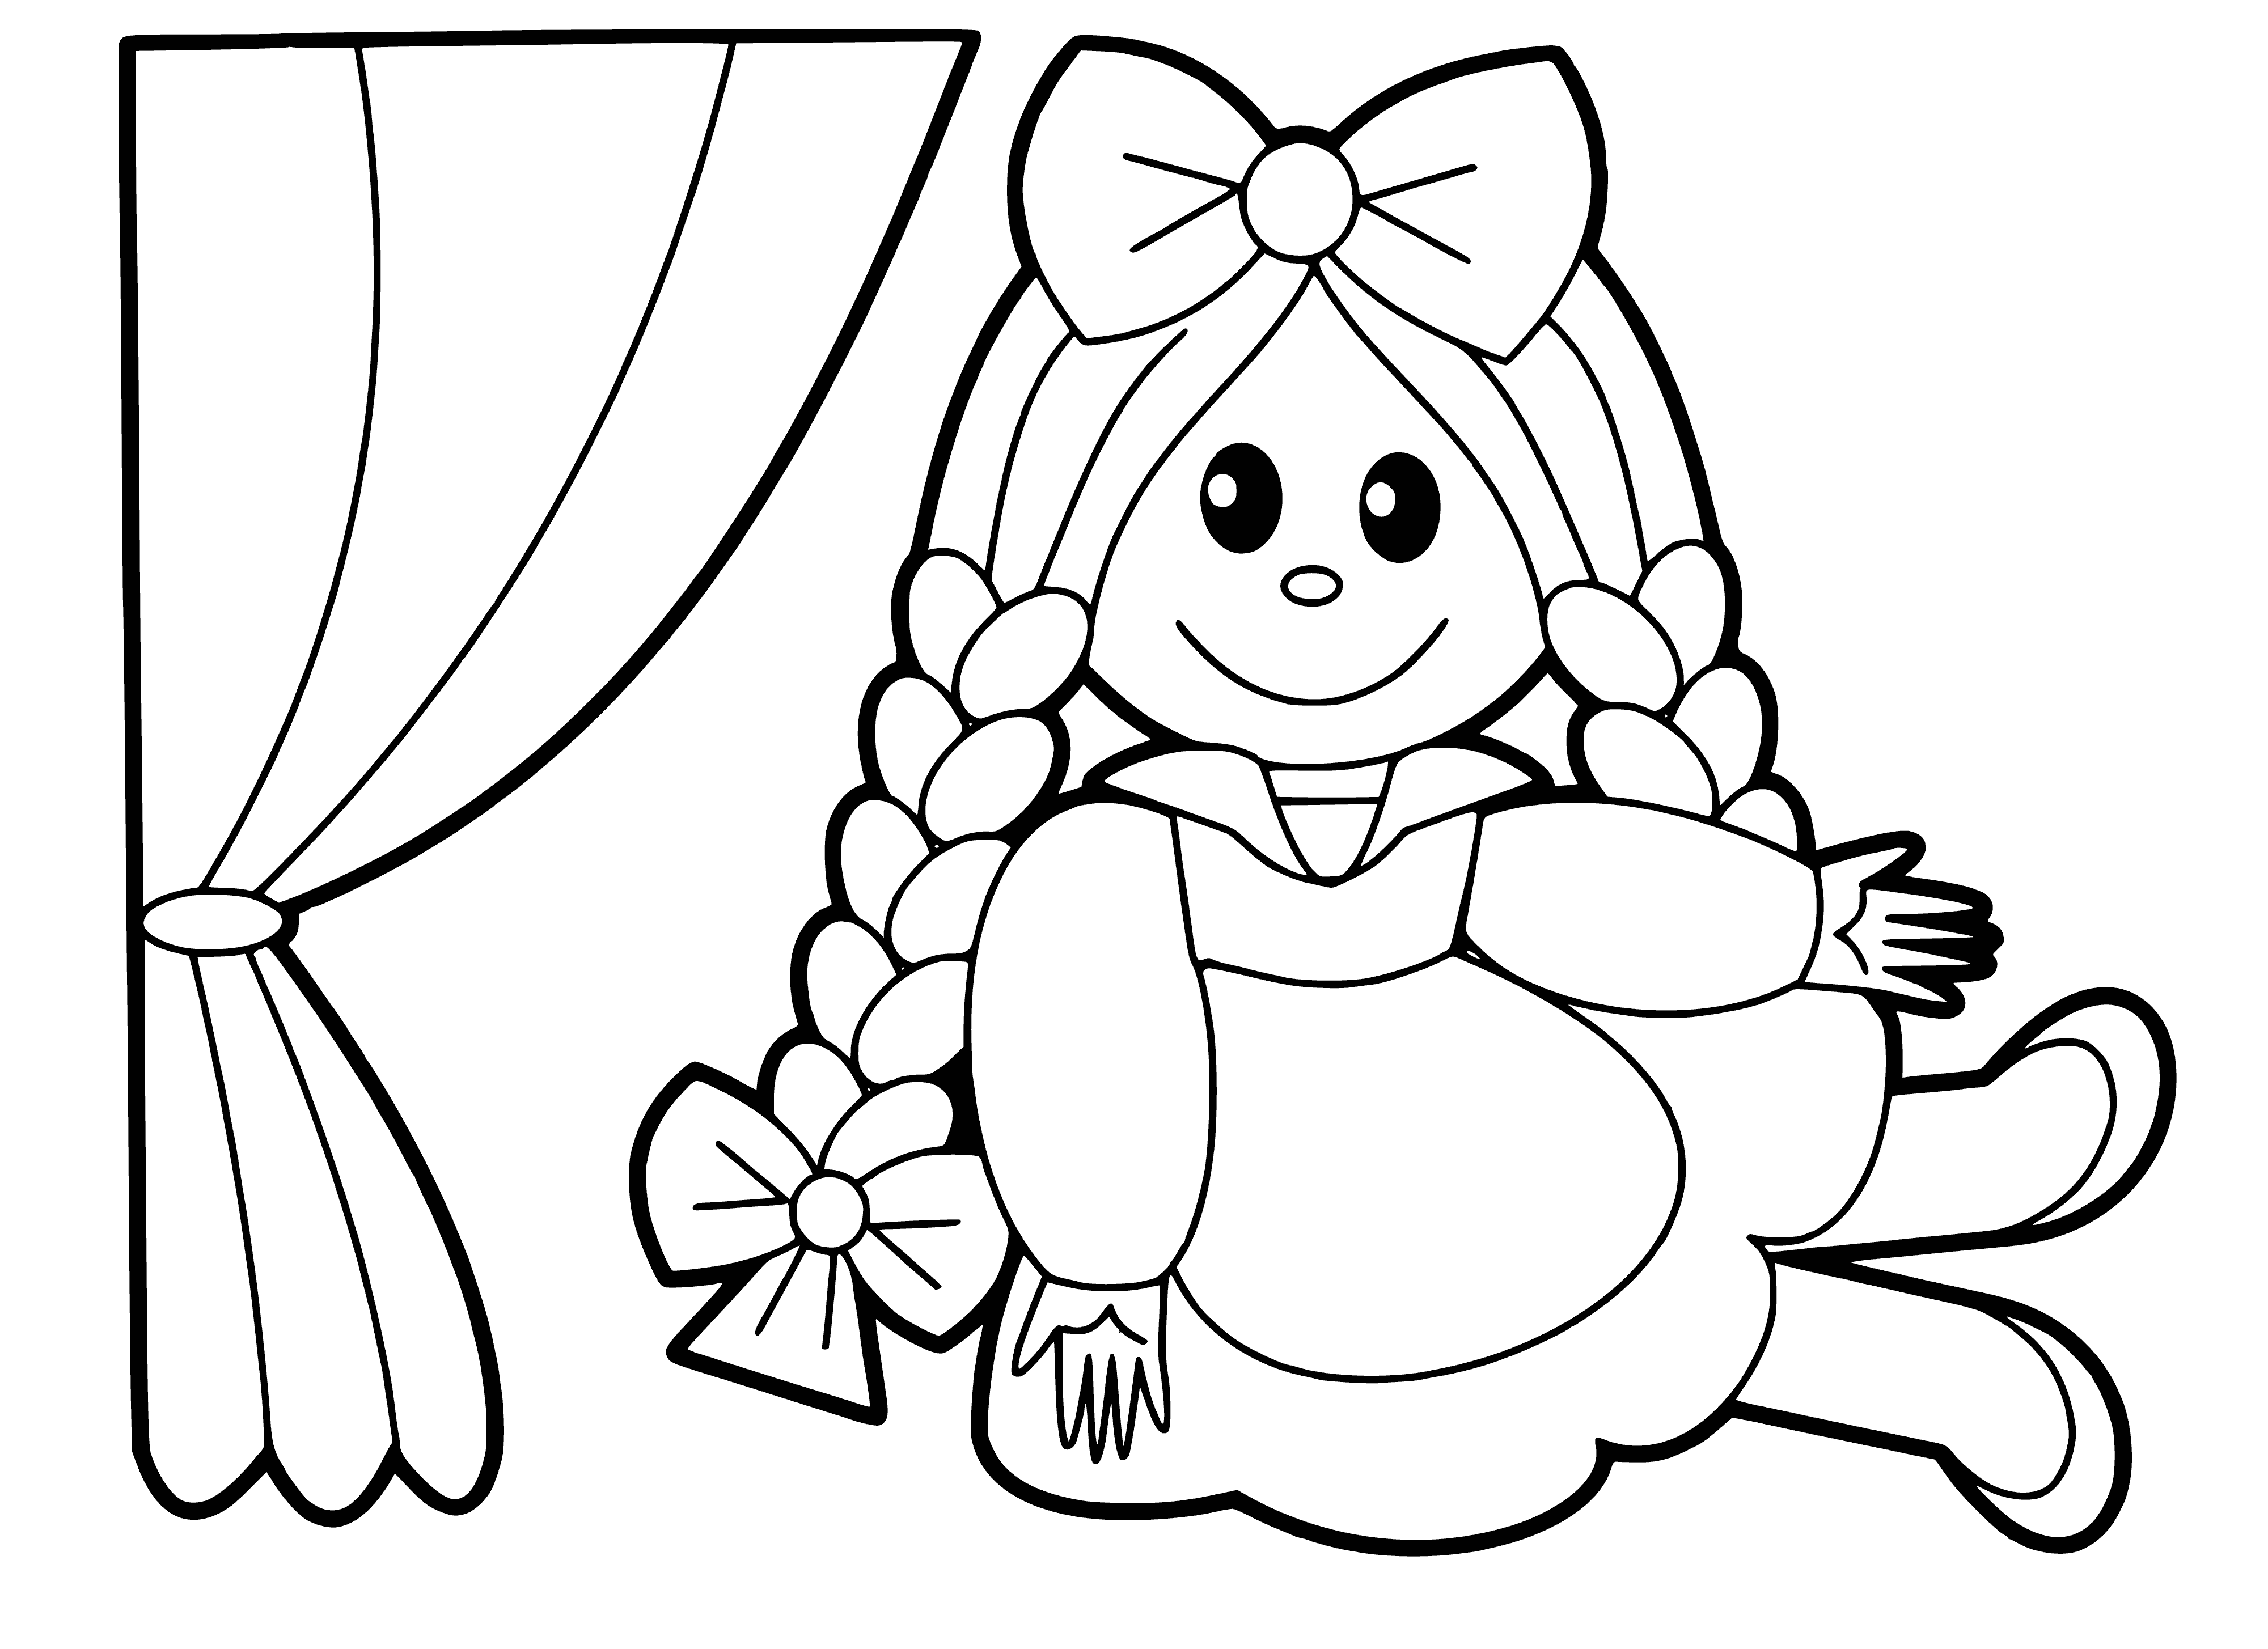 coloring page: Coloring page of a doll wearing a pink dress with a white collar and blond hair, plus two hearts above. For 3-4 year olds.